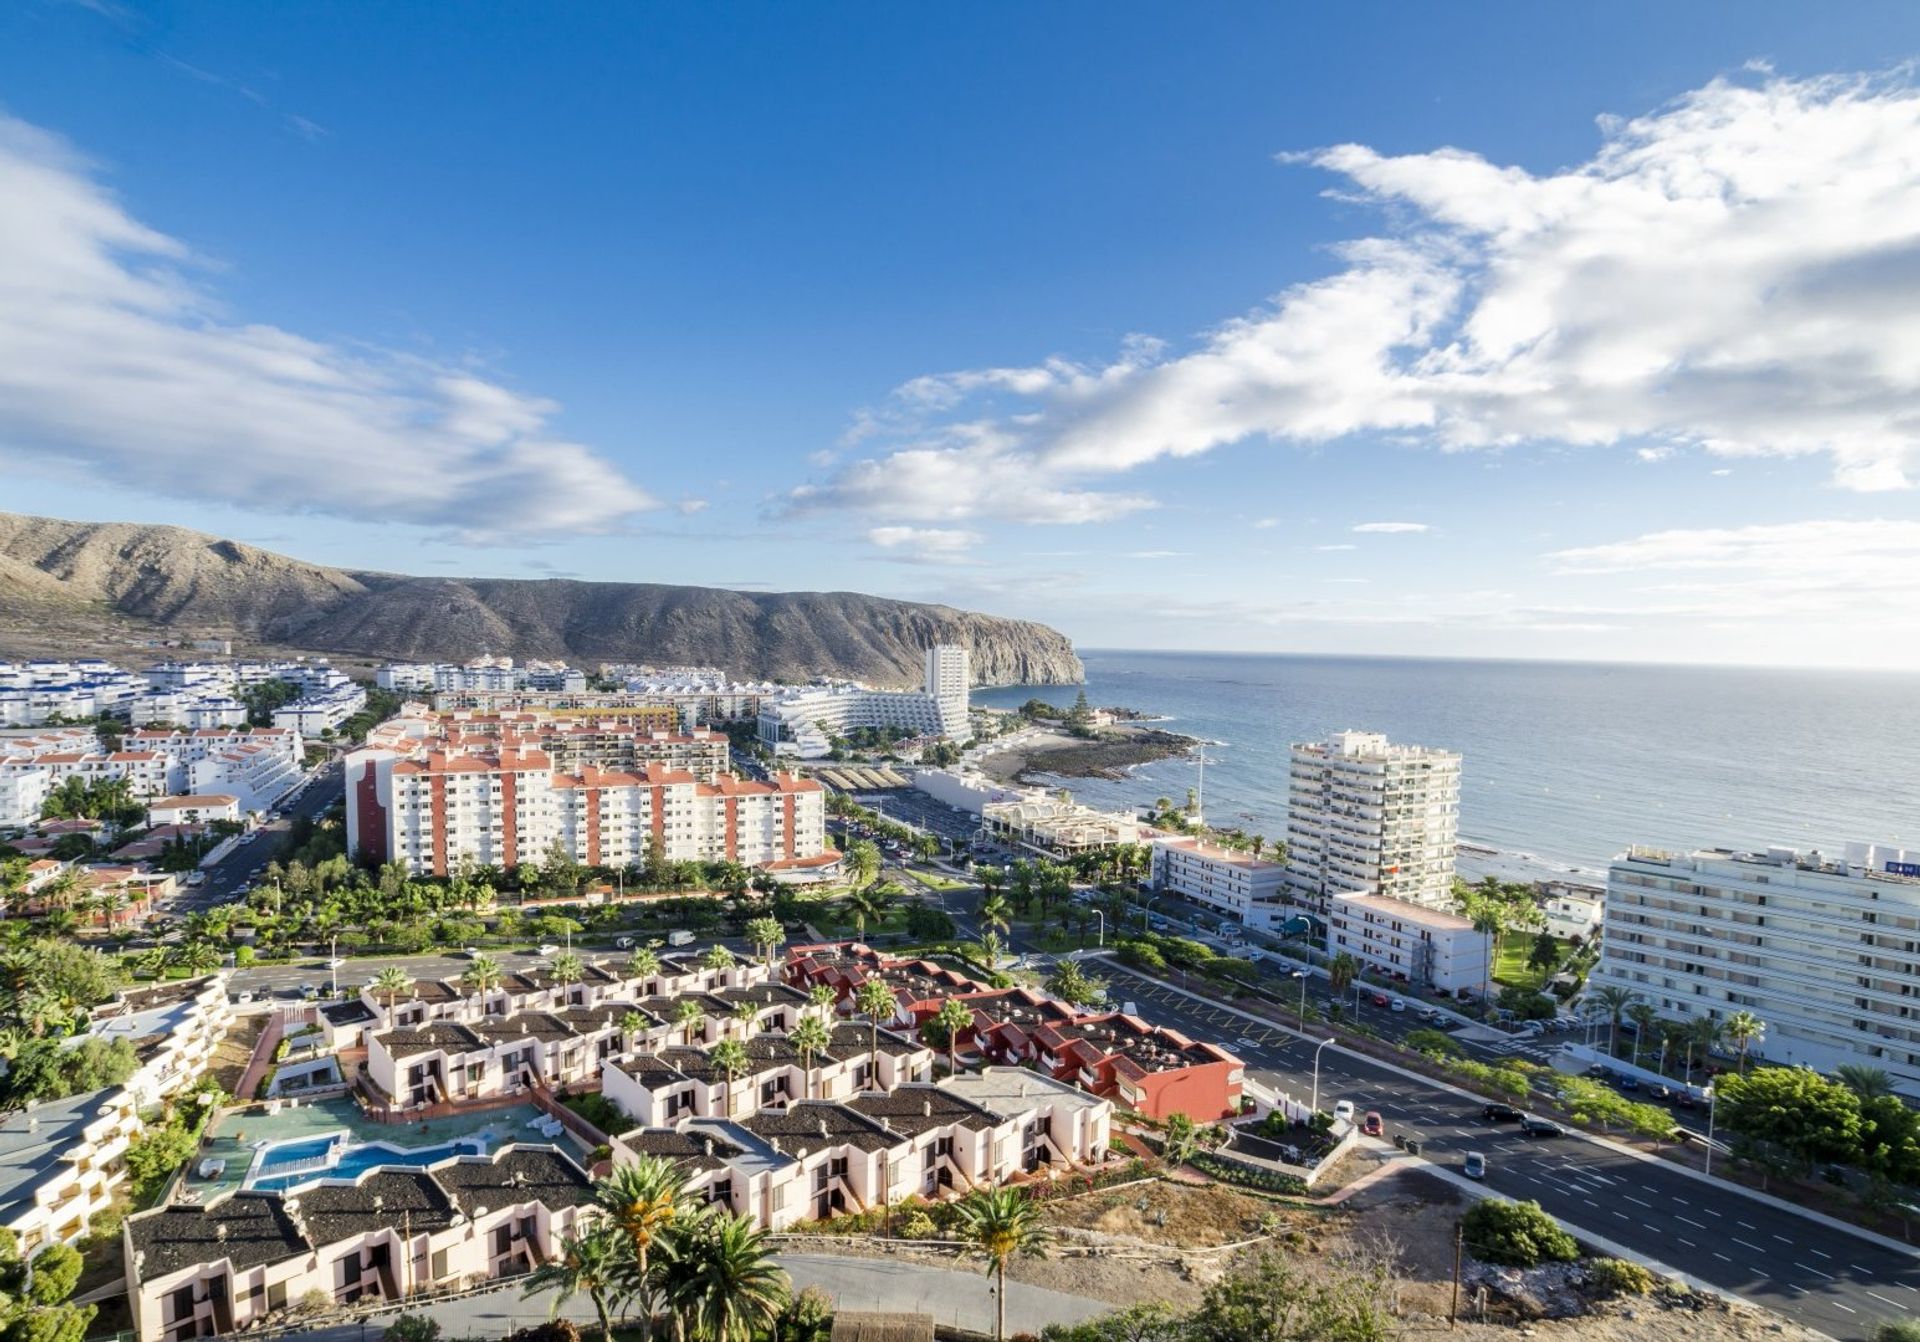 Los Cristianos was once a quiet fishing village, now one of the most popular tourist resorts in Tenerife